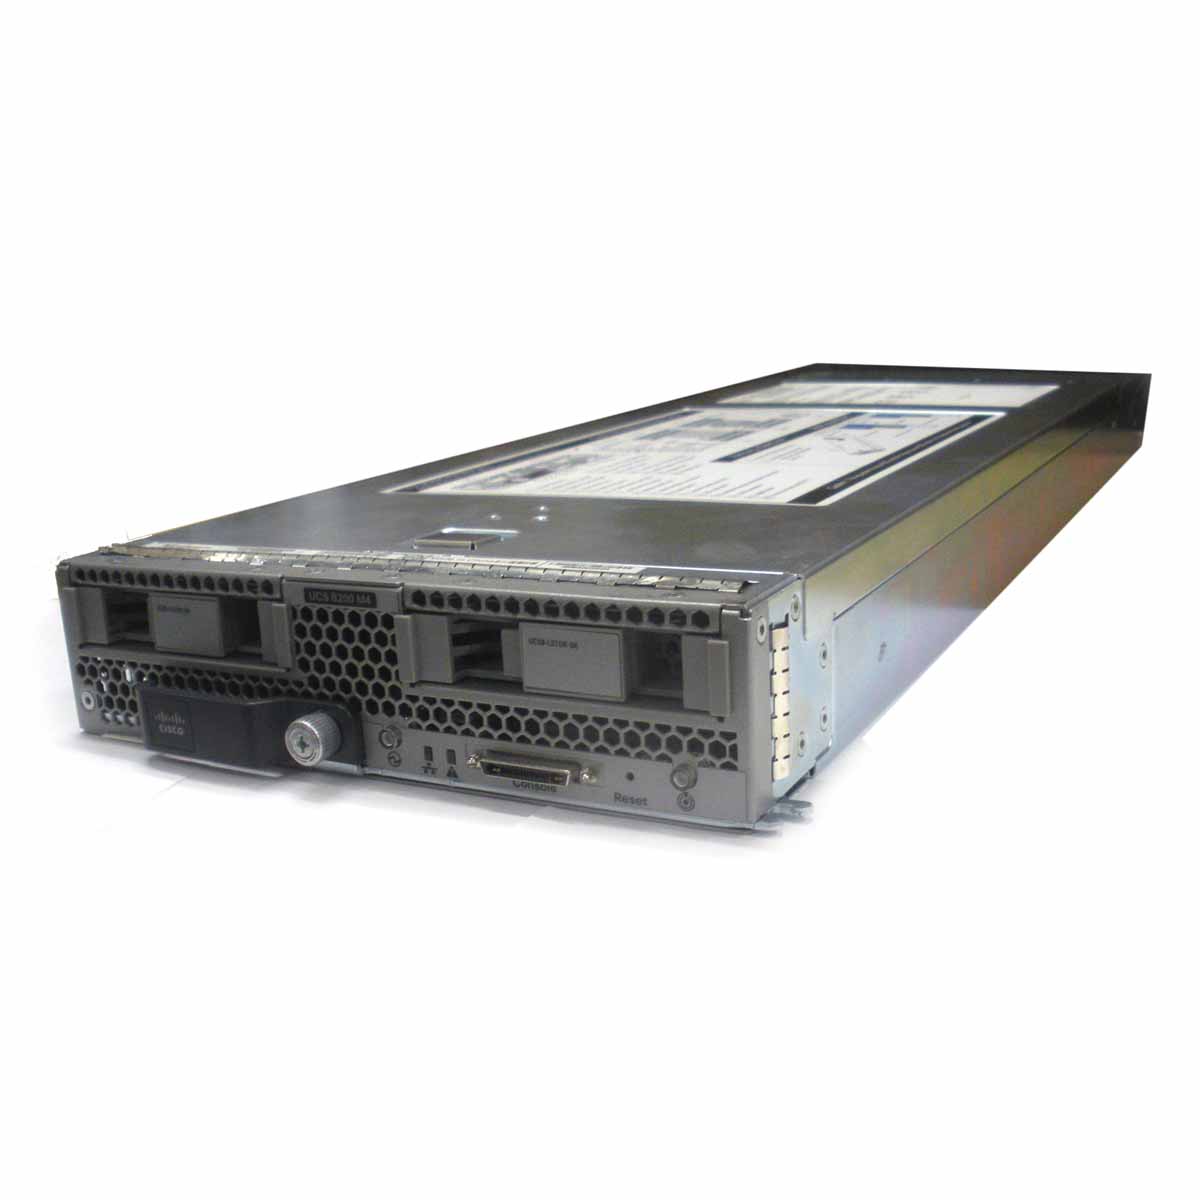 Save on refurbished Cisco UCS B200 M4 Blade Servers from your trusted partners at Flagship Technologies.